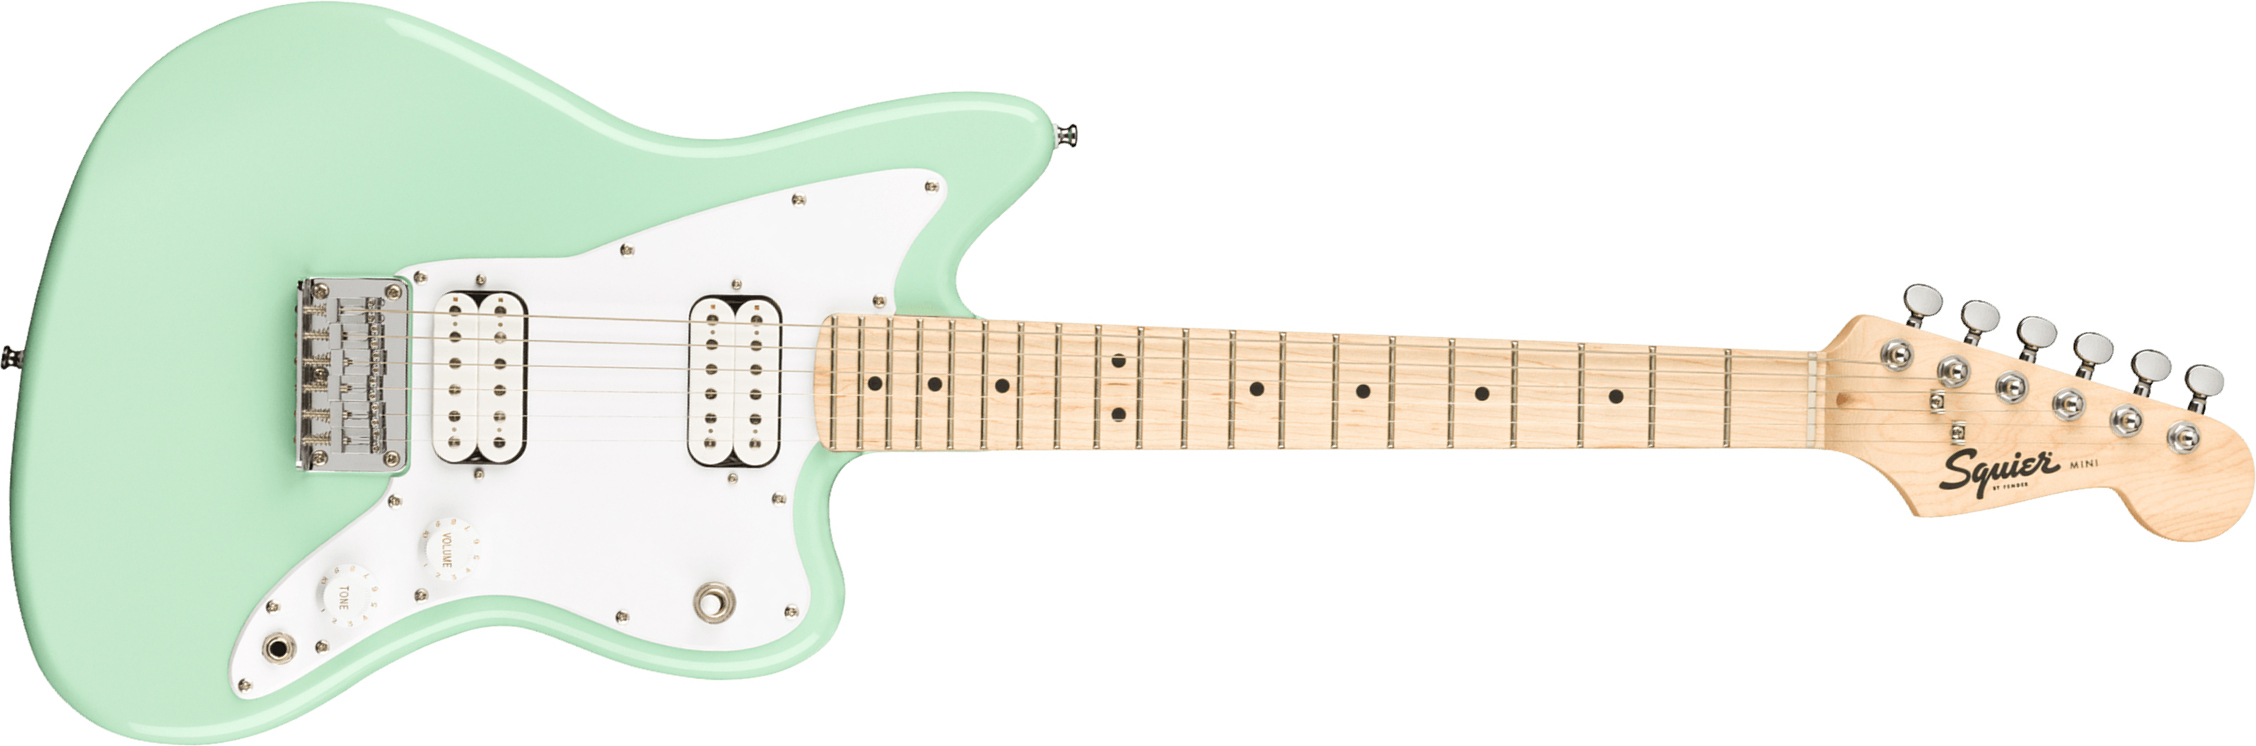 Squier Mini Jazzmaster Bullet Hh Ht Mn - Surf Green - Electric guitar for kids - Main picture